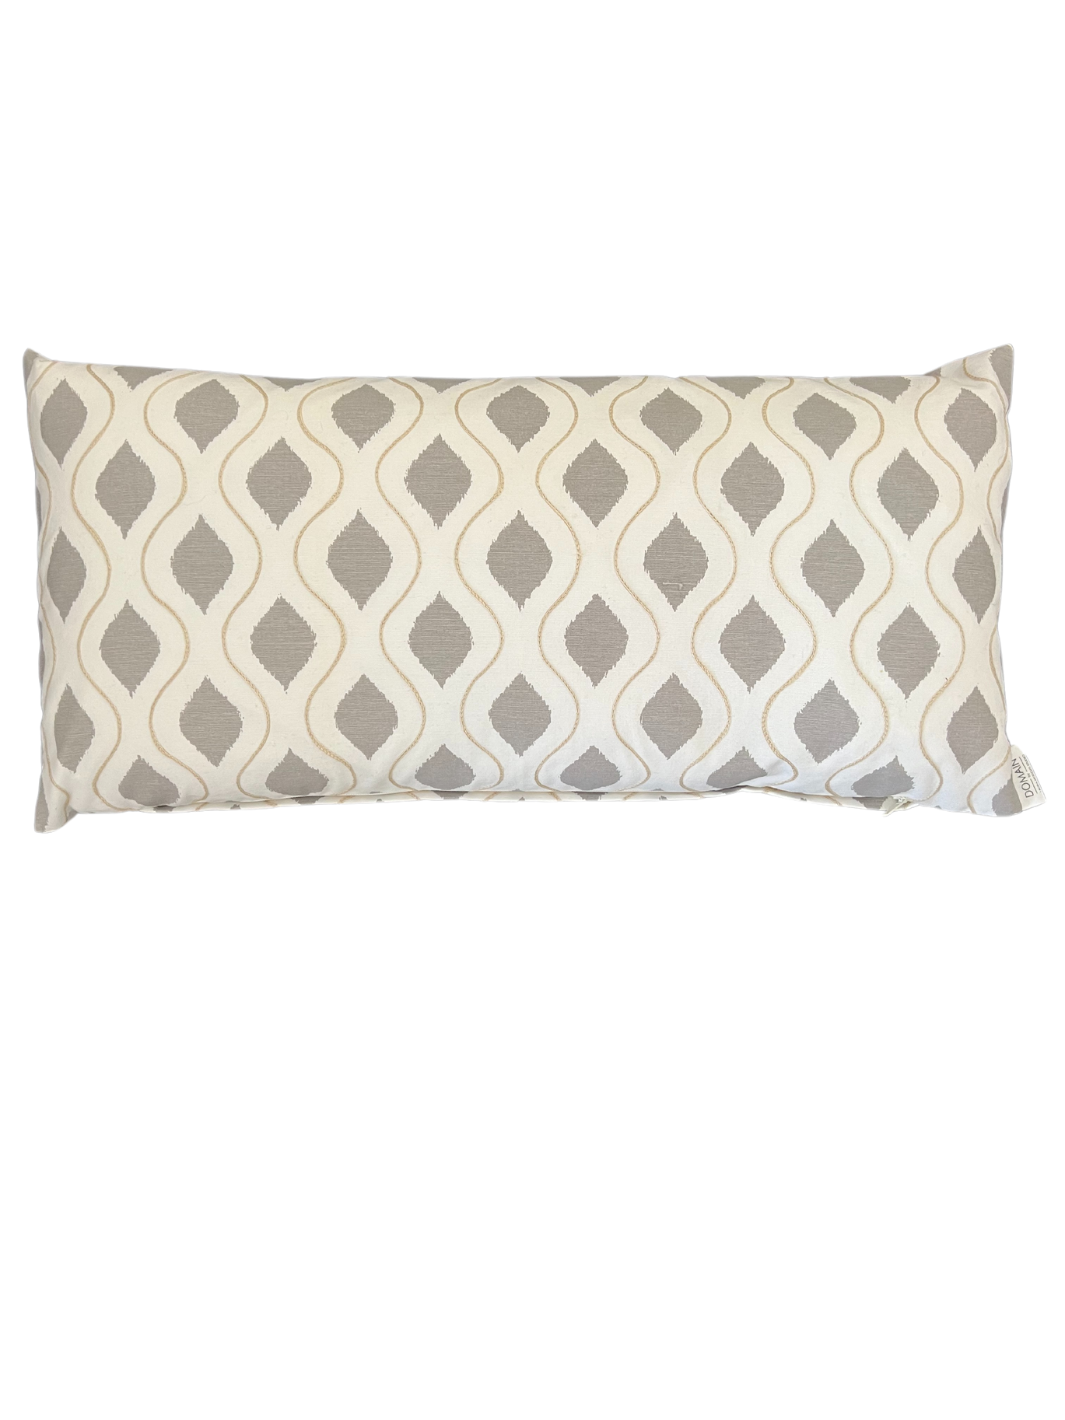 White and Brown Medallion Lumbar Pillow